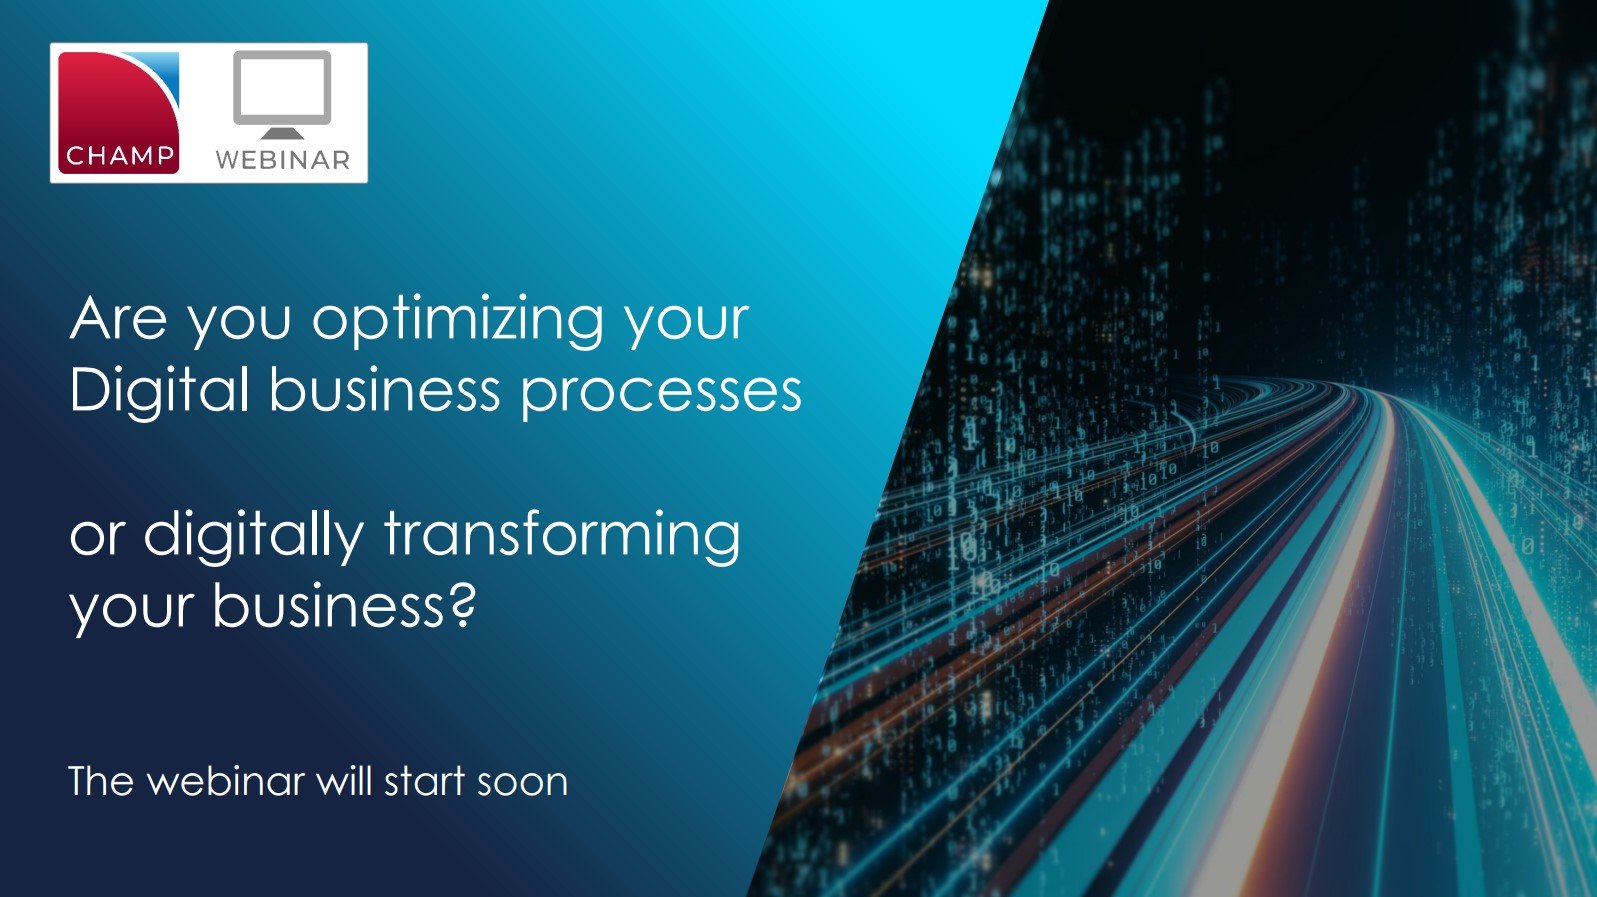 WEBINAR: Are you optimizing your digital business processes or digitally transforming your business?